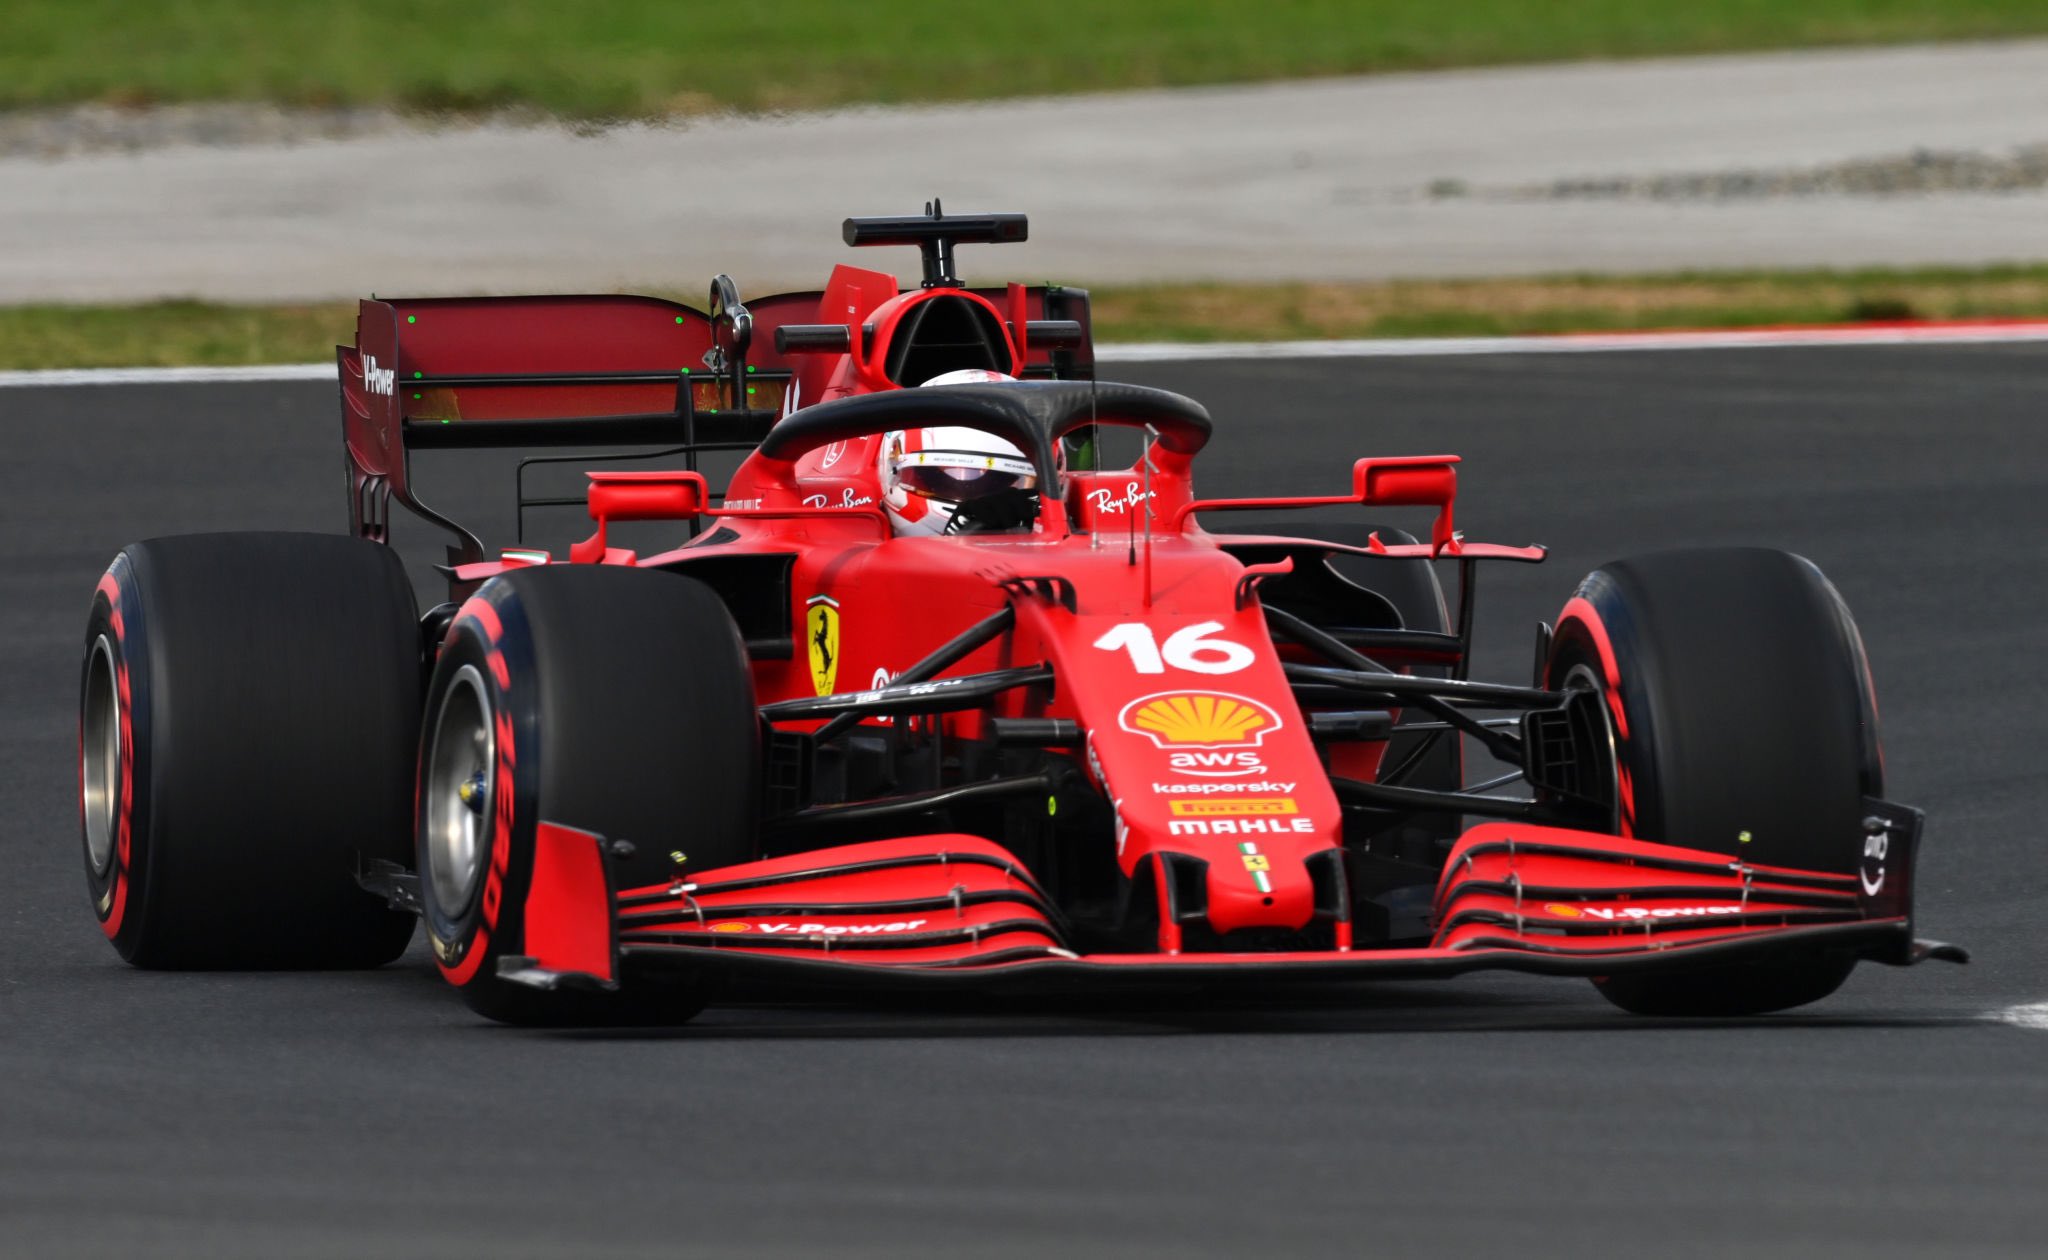 Ferrari: Charles Leclerc confirmed in practice the data from simulations |  2021 Turkish GP